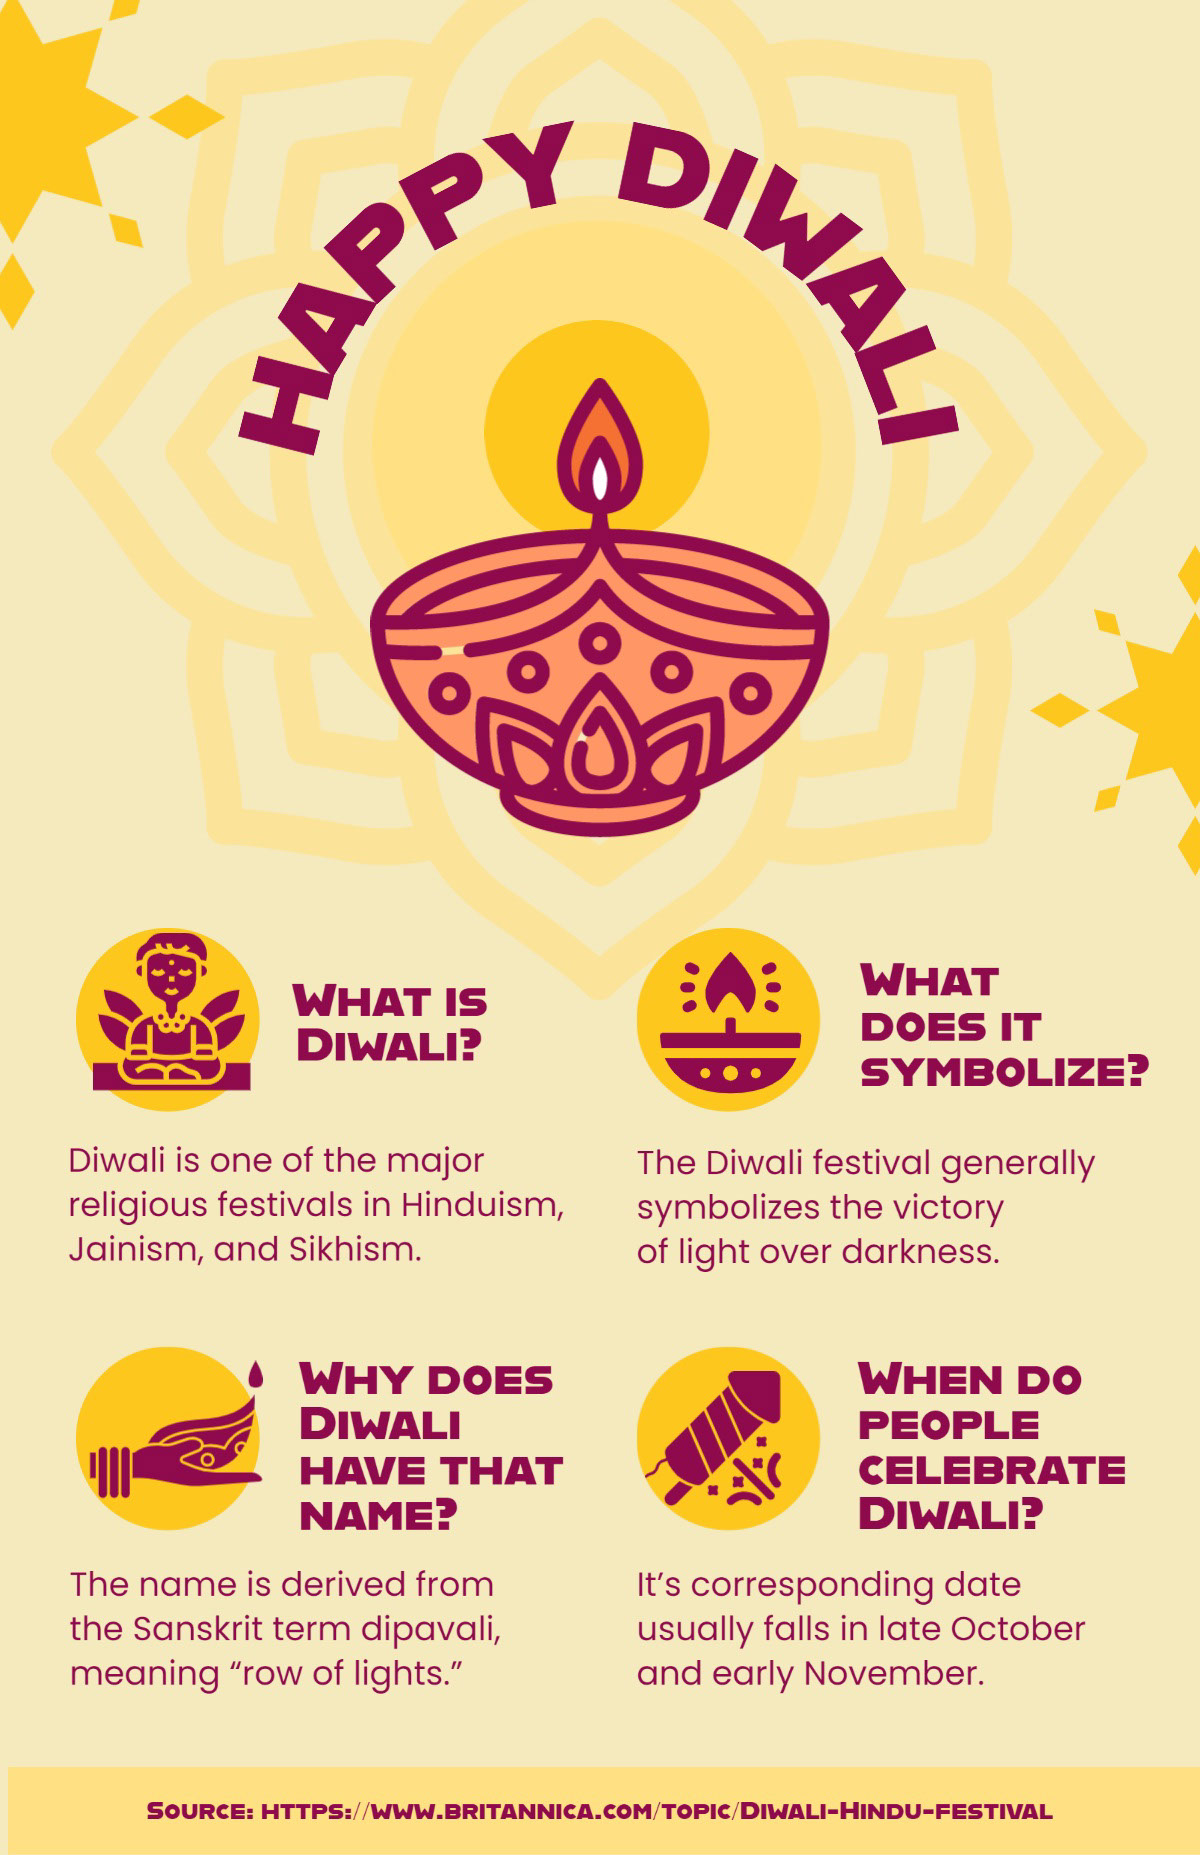 22 Best Diwali Flyers & Posters to Download Now | Envato Tuts+